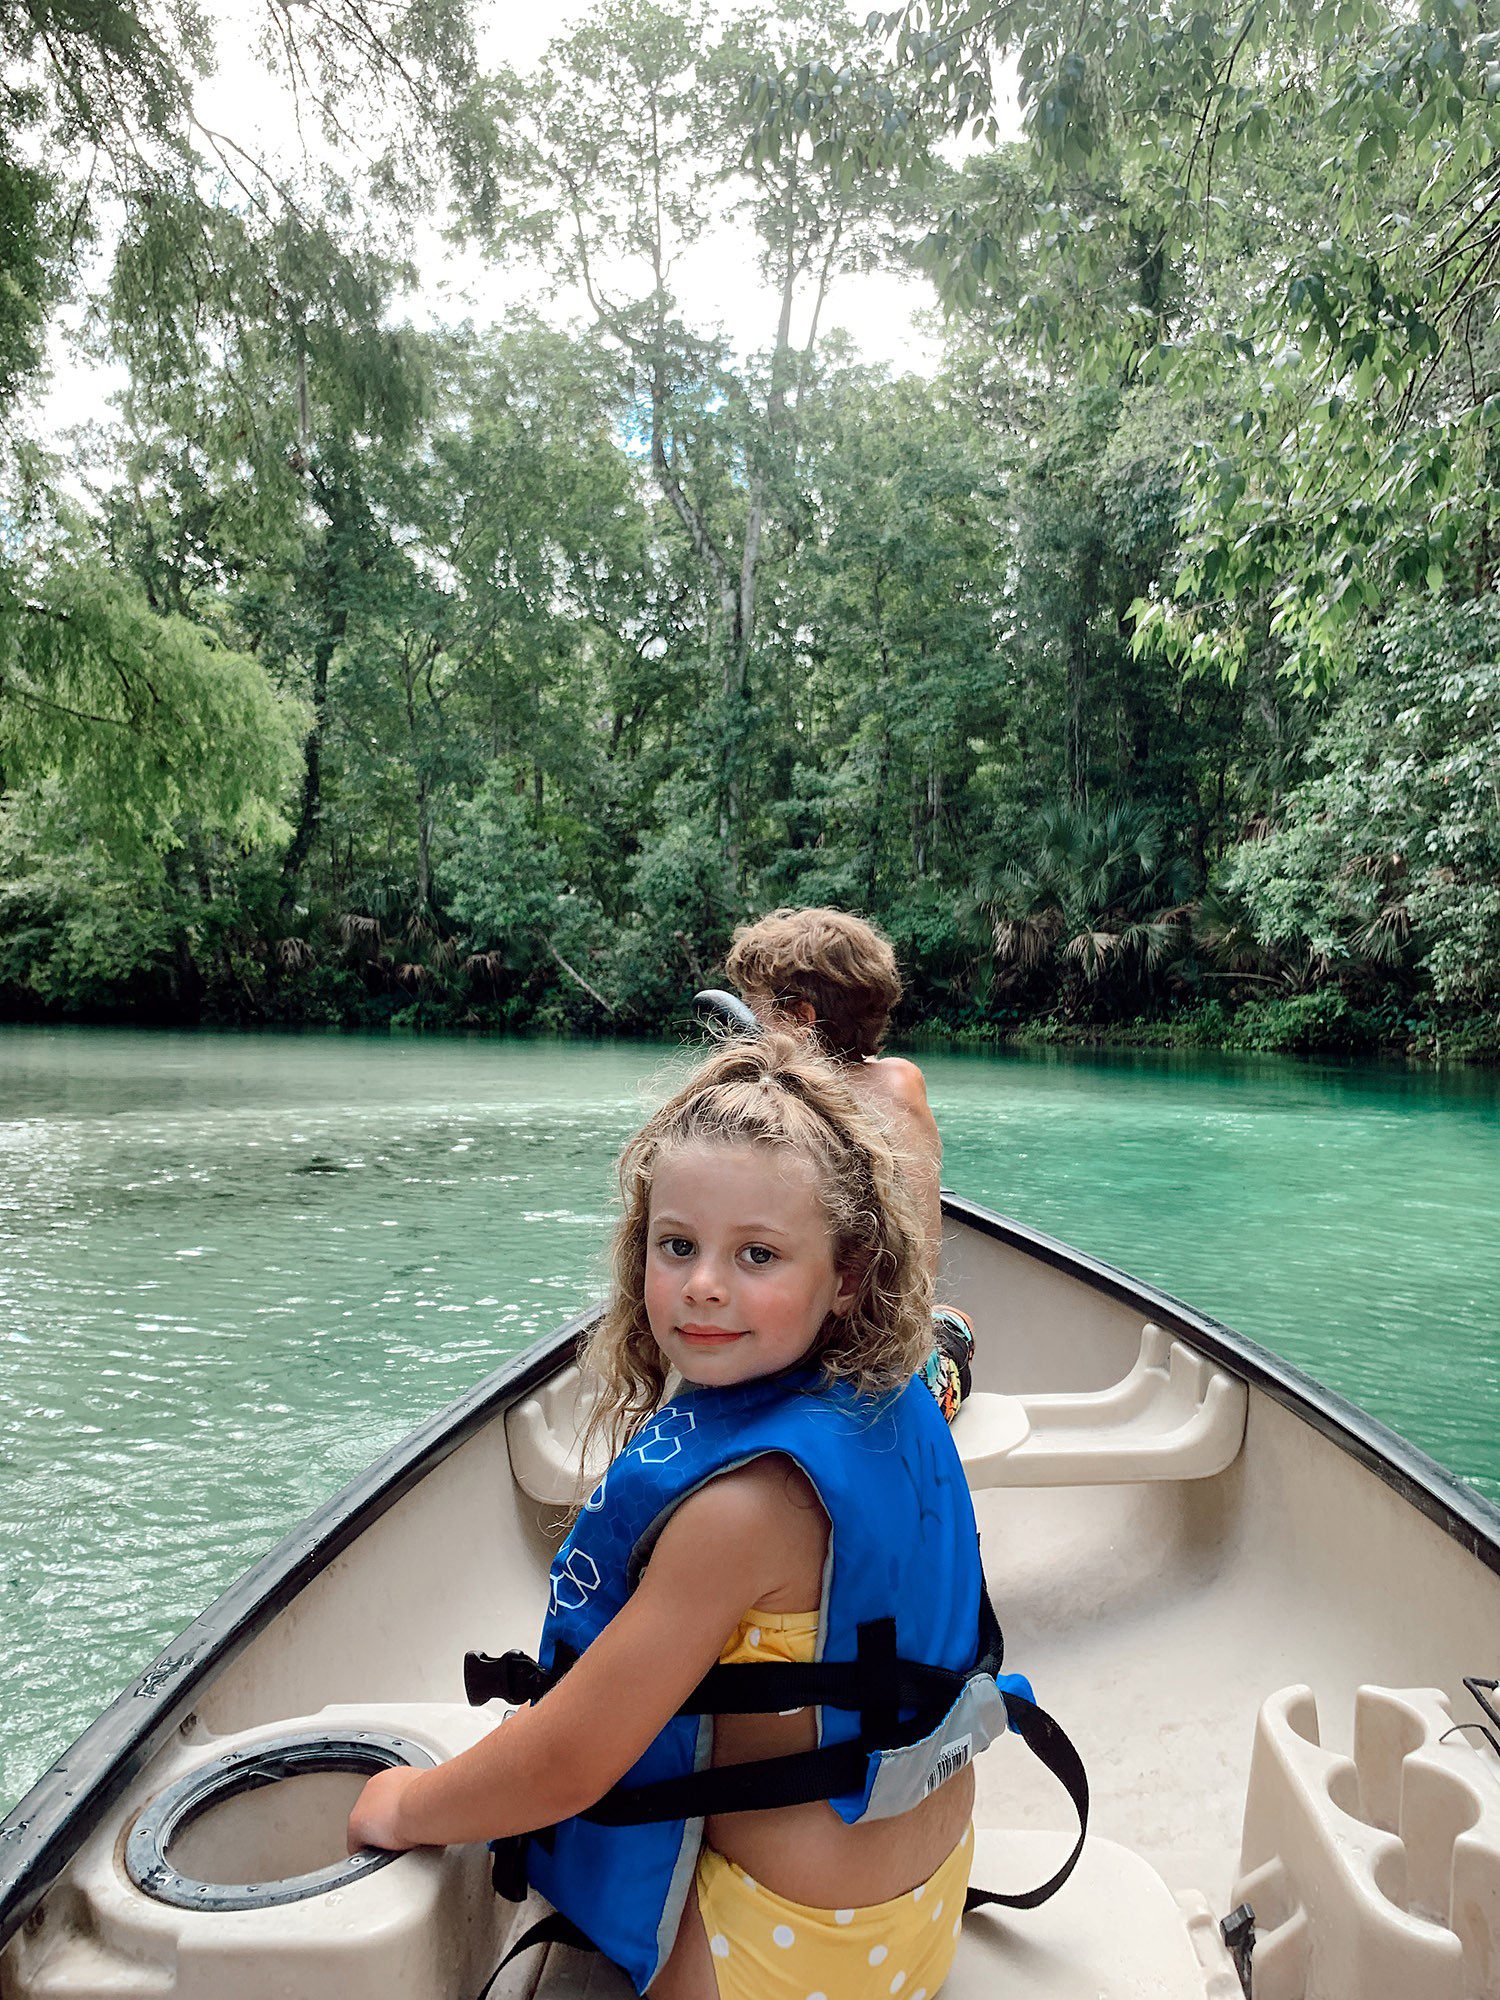 Top 5 Best Places in Florida for your Next Girls Trip featured by top FL blogger, Tabitha Blue - Weeki Wachee Canoeing